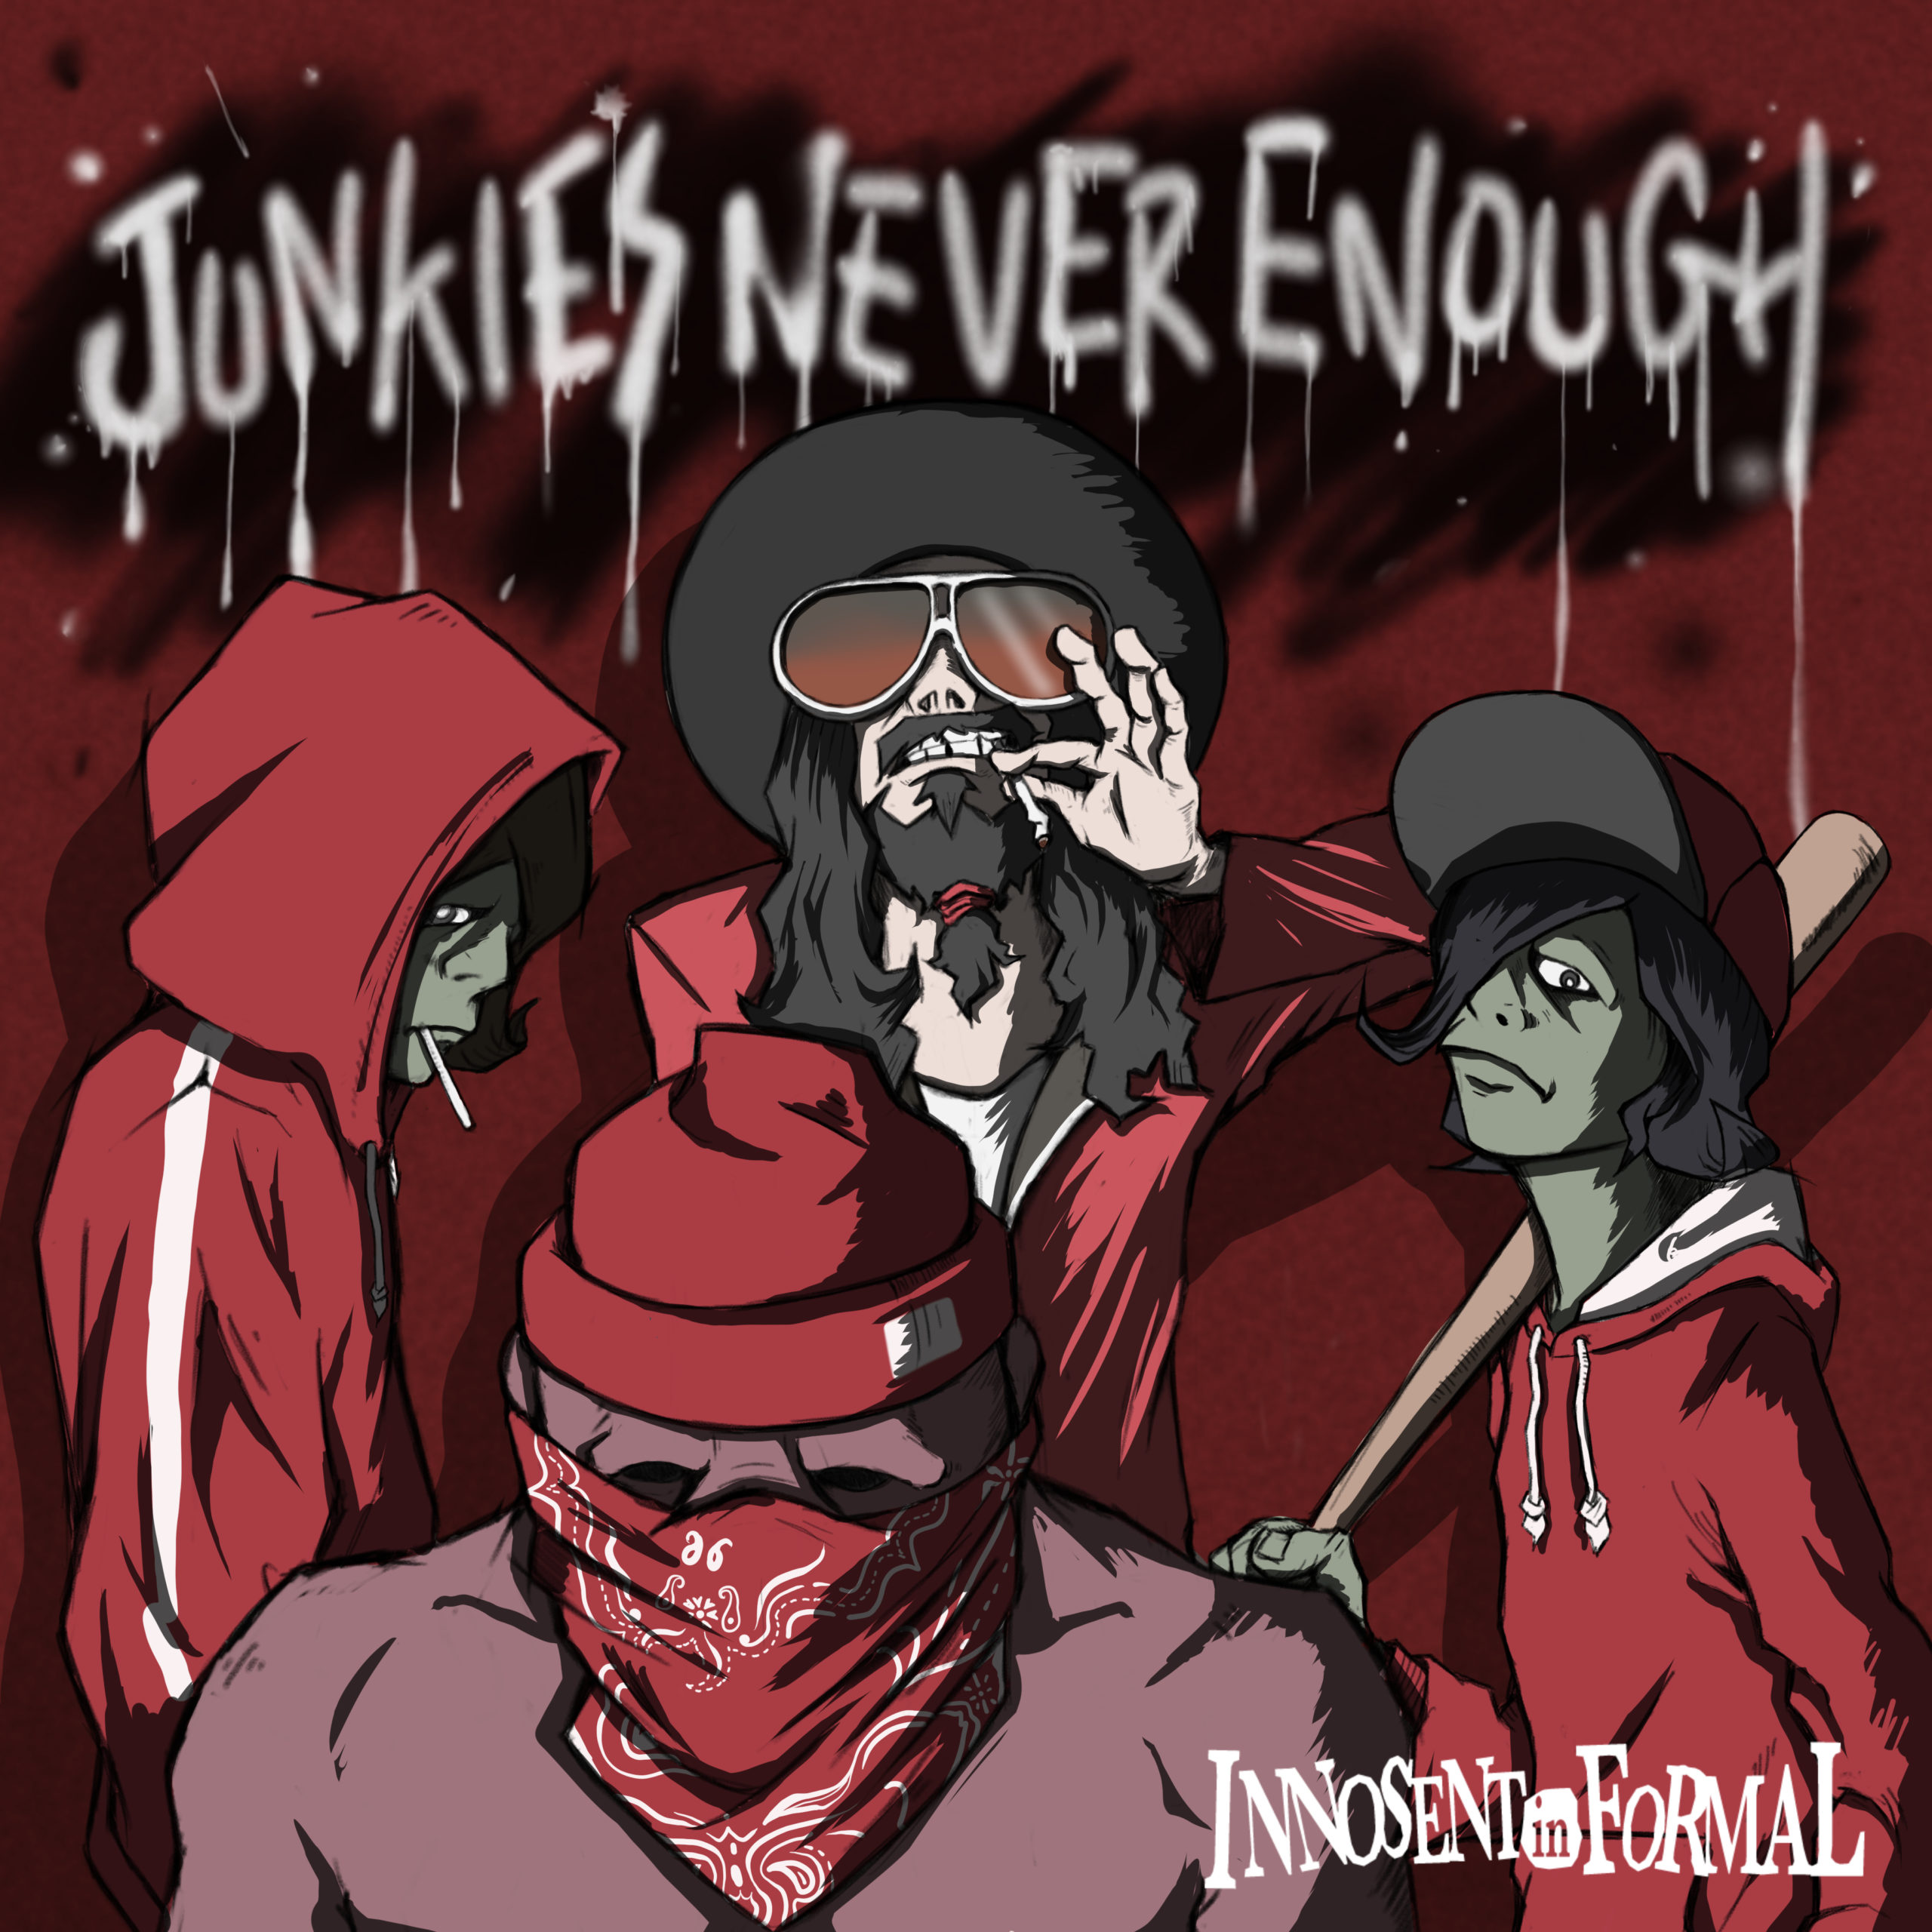 INNOSENT in FORMAL『Junkie’s never enough』